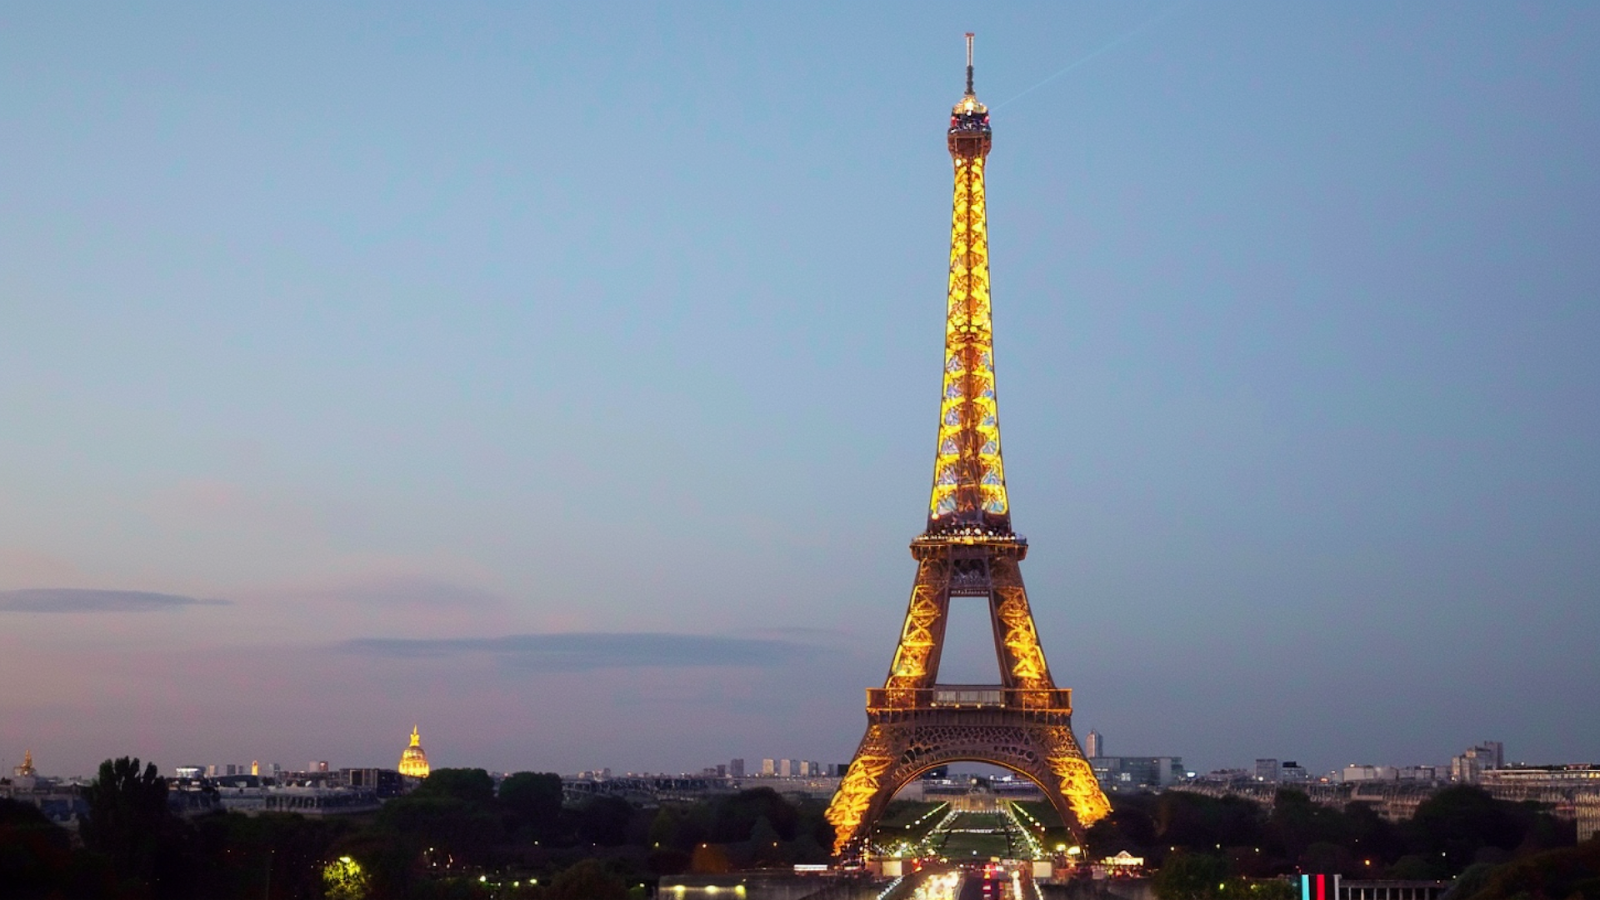 The Eiffel Tower under clear sunset skies